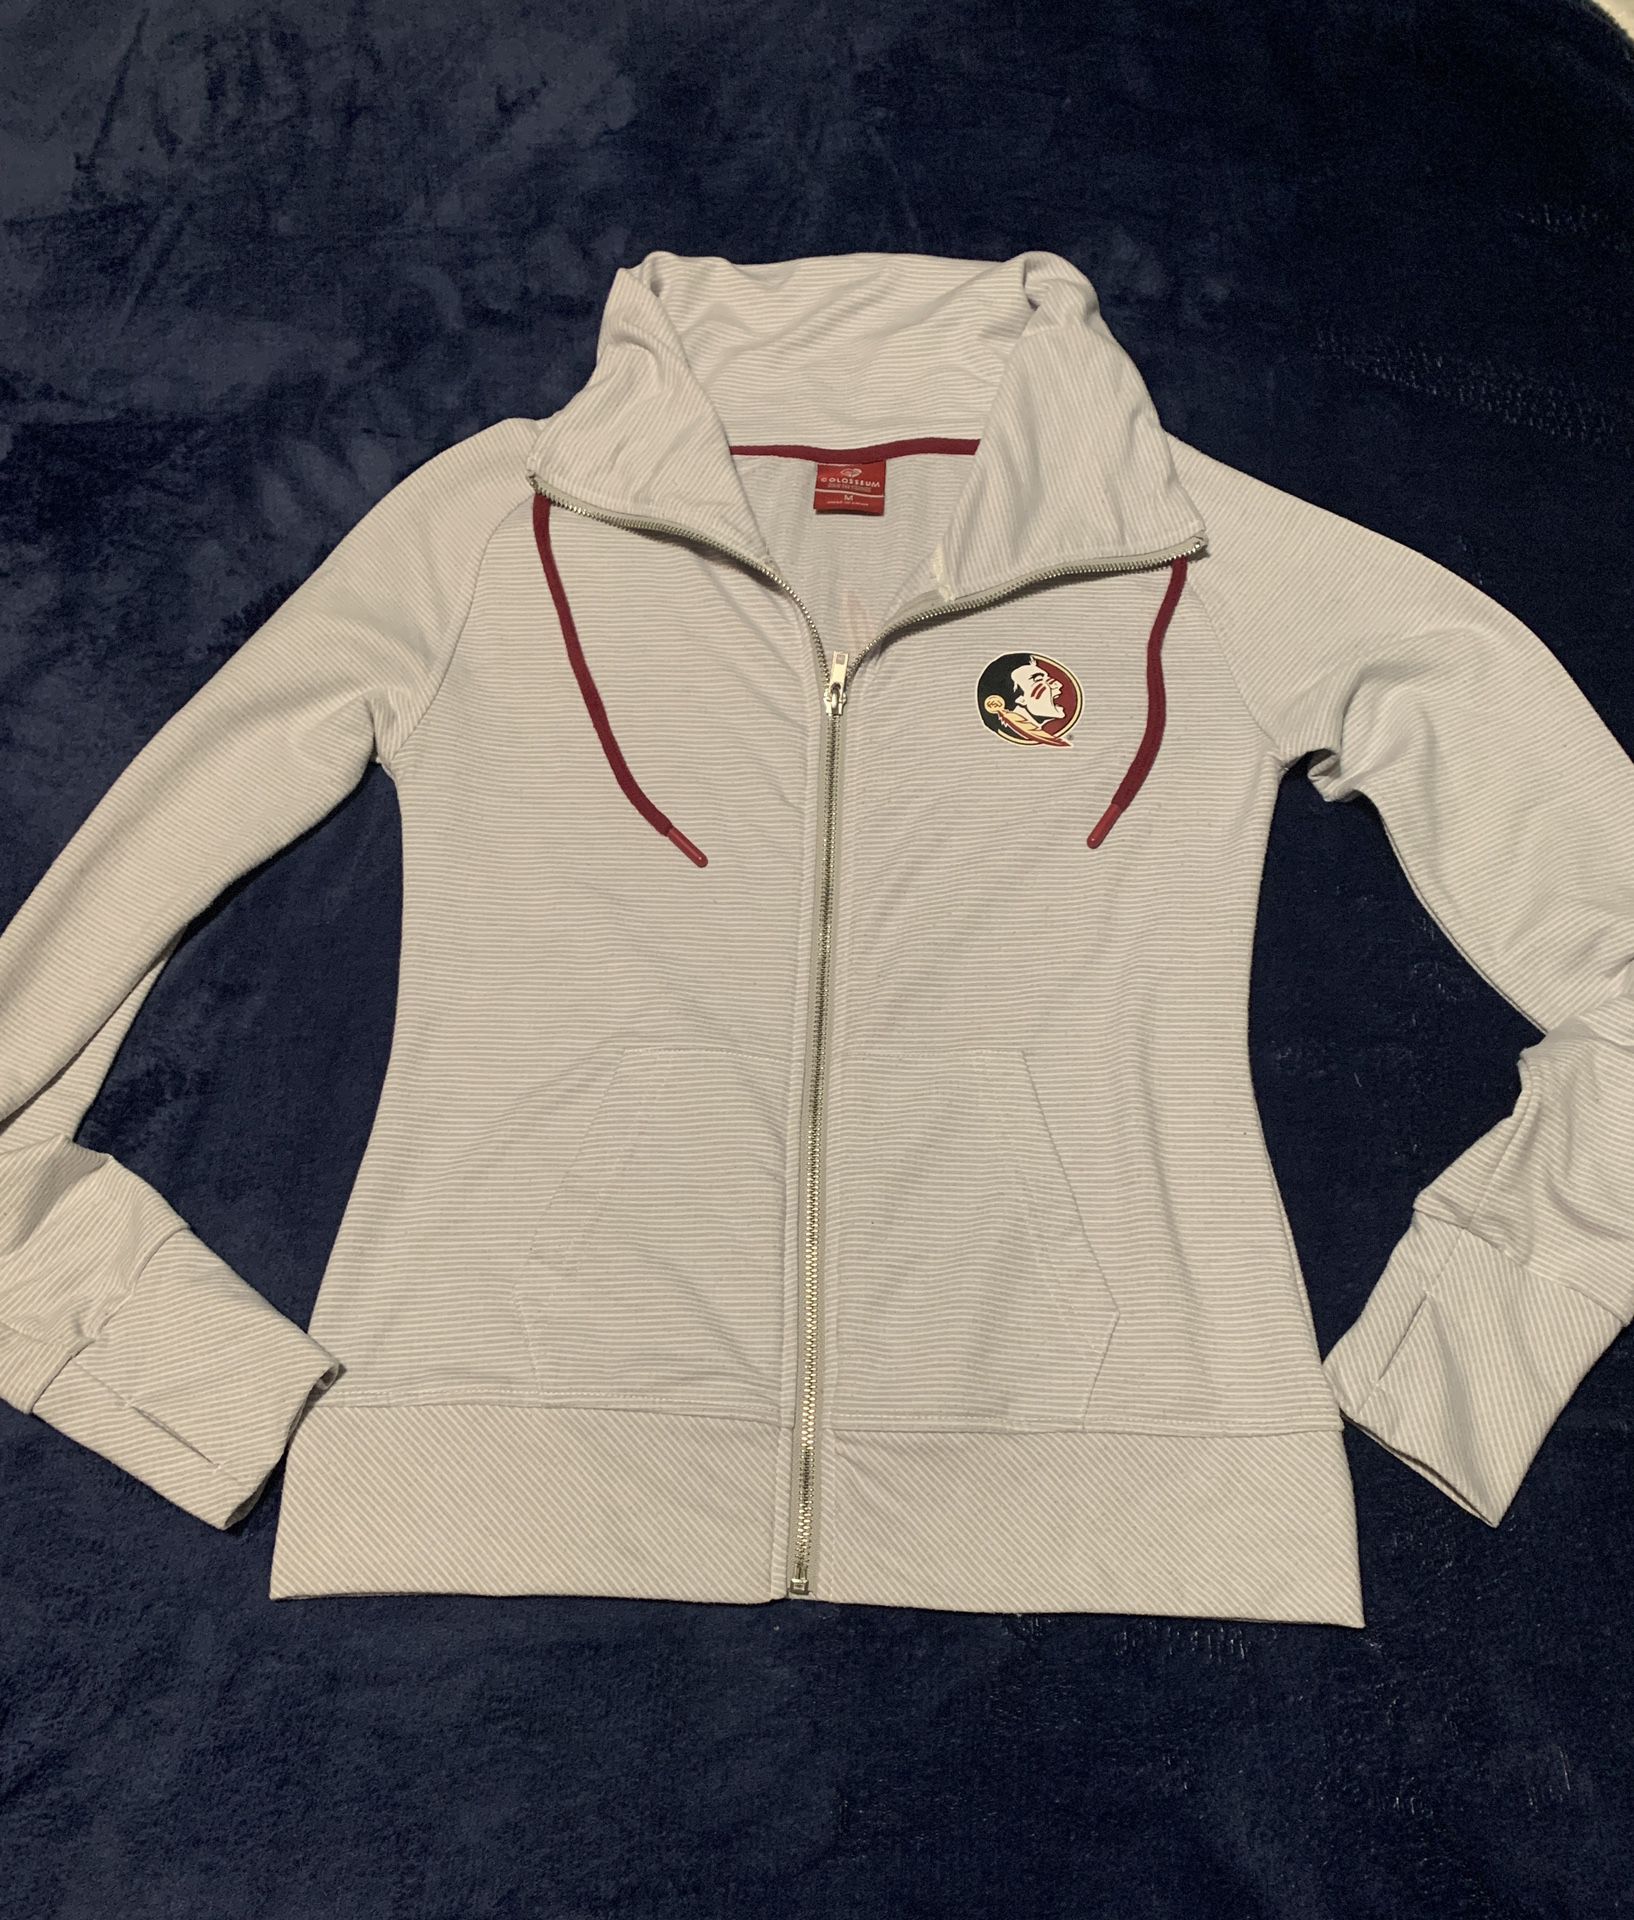 Florida State Seminoles Colosseum Womens Size Med.Full Zip Jacket w/ Thumb Holes